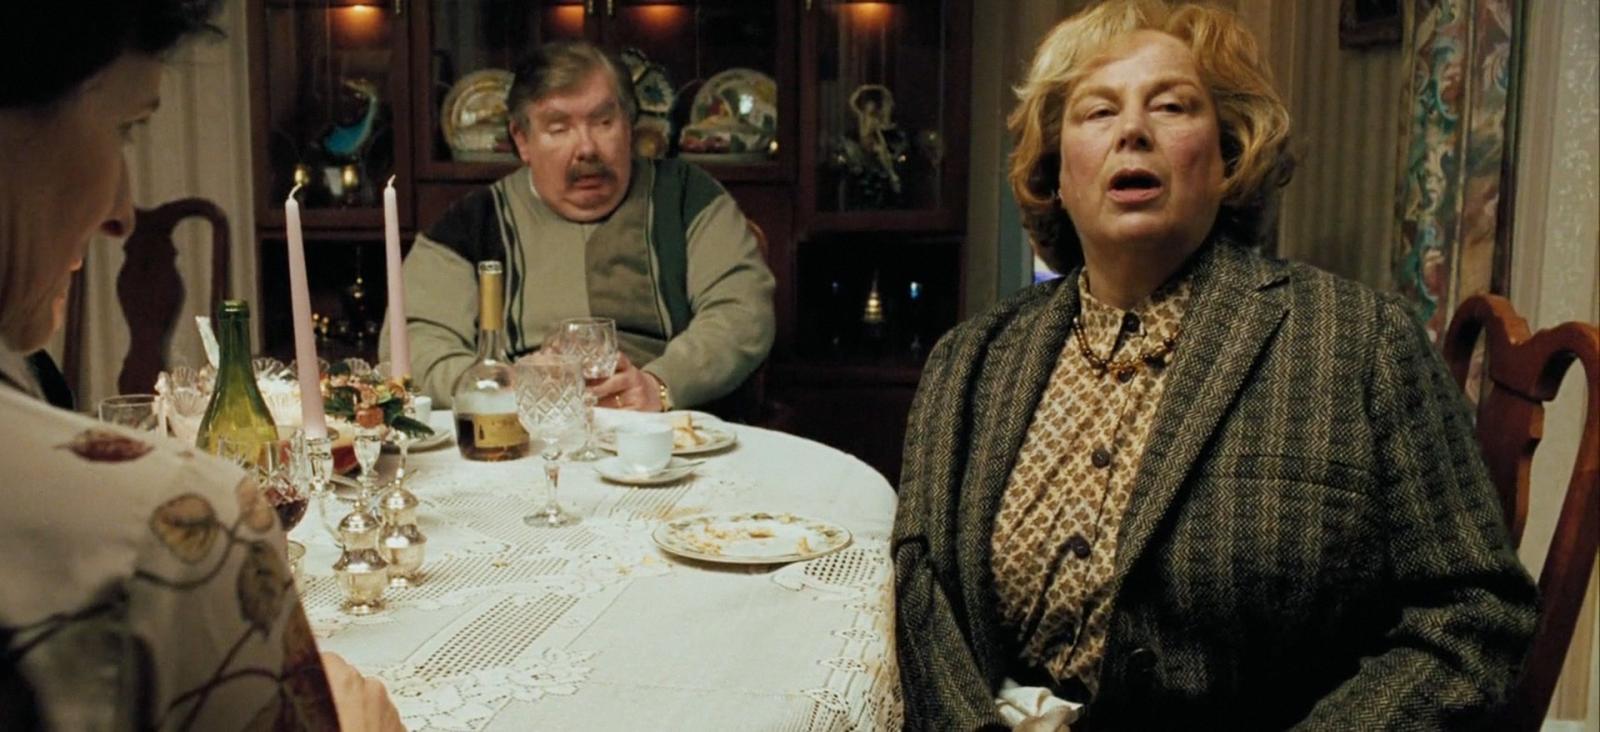 The 8 Most Annoying Side Characters in the Harry Potter Series - image 8